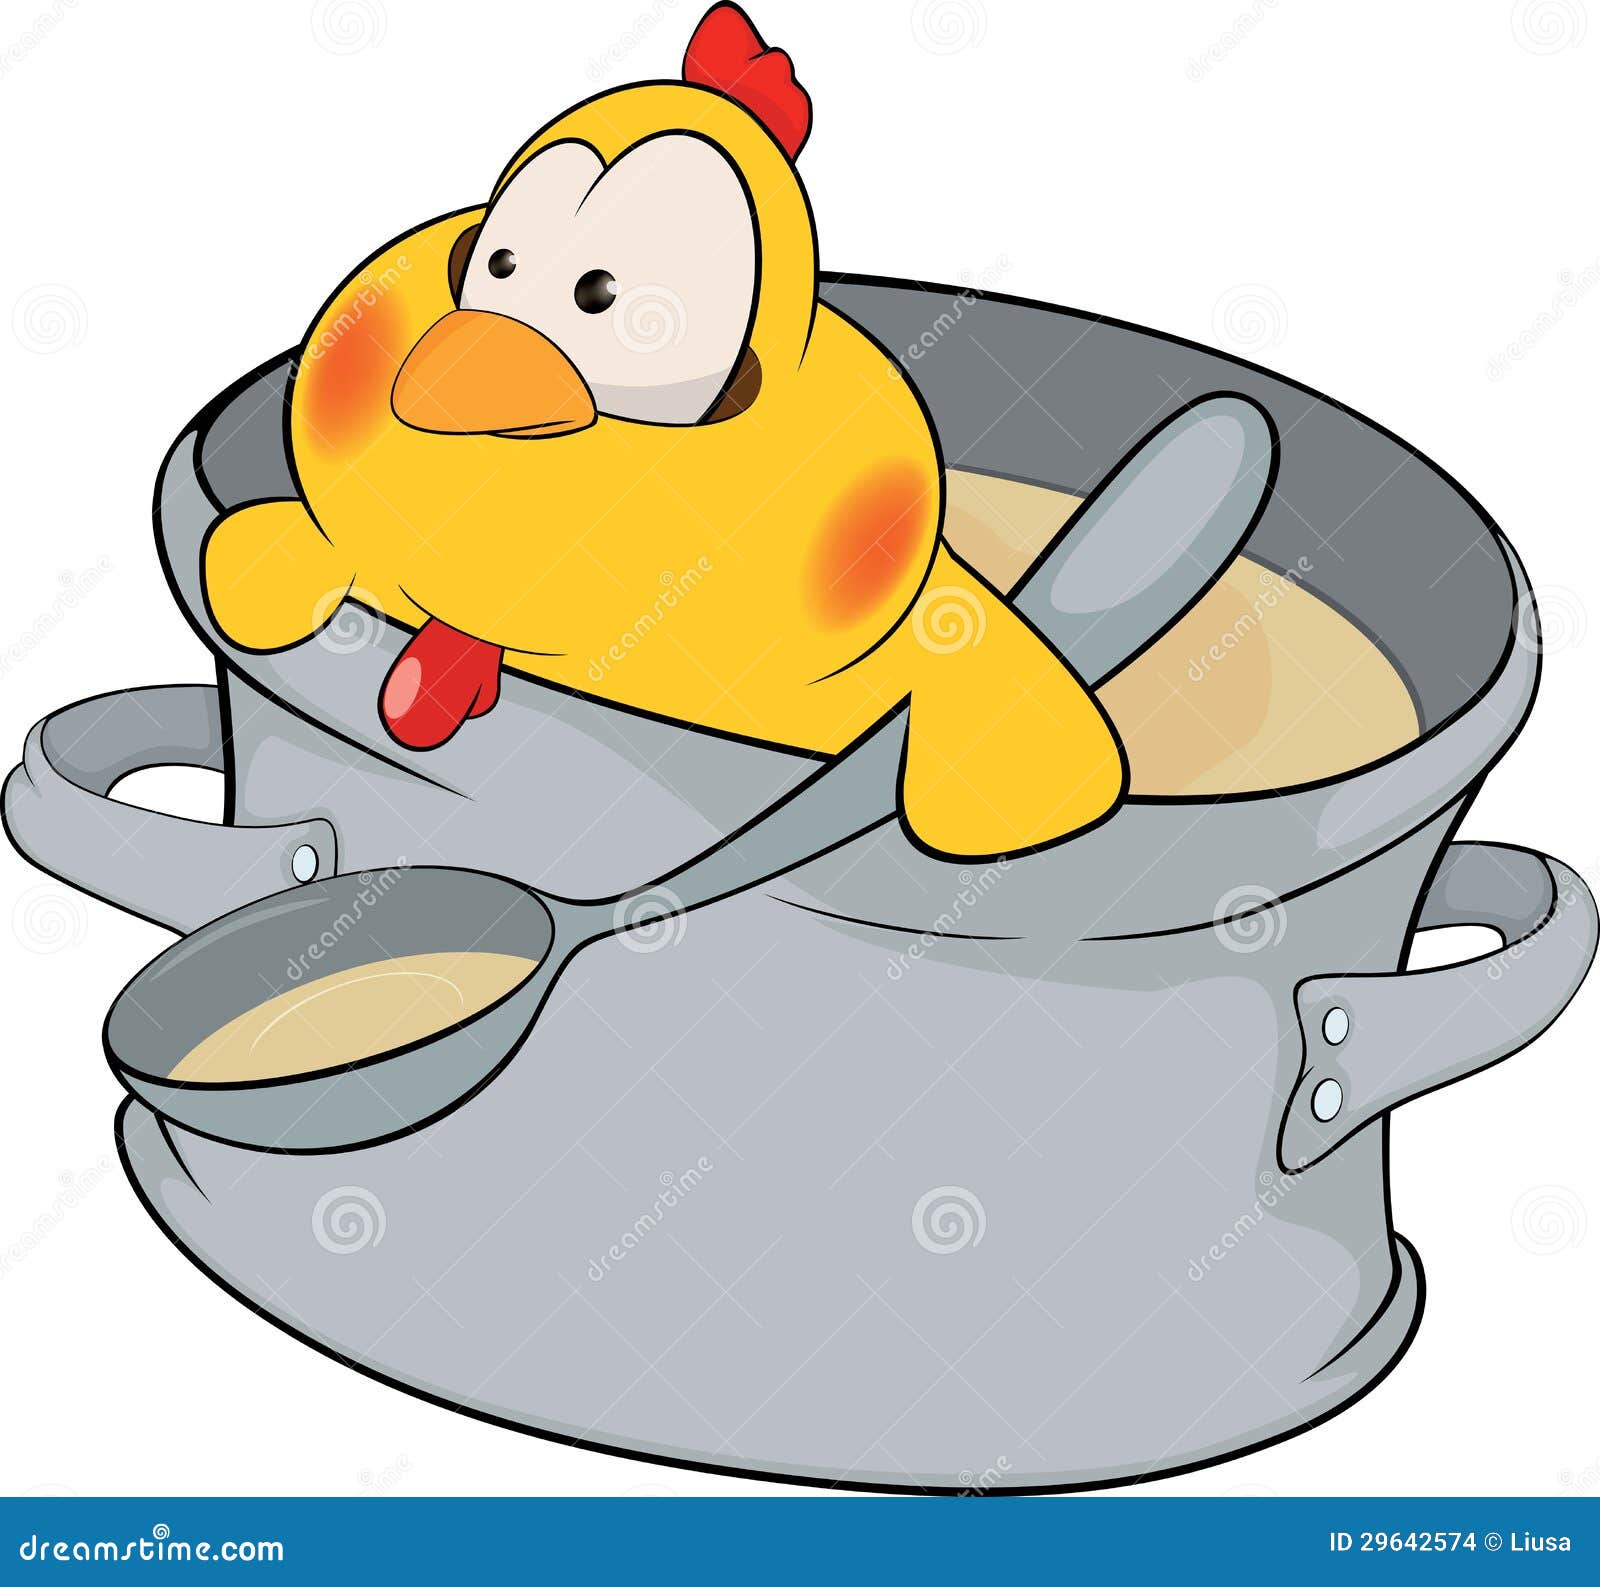 clipart chicken cooked - photo #42